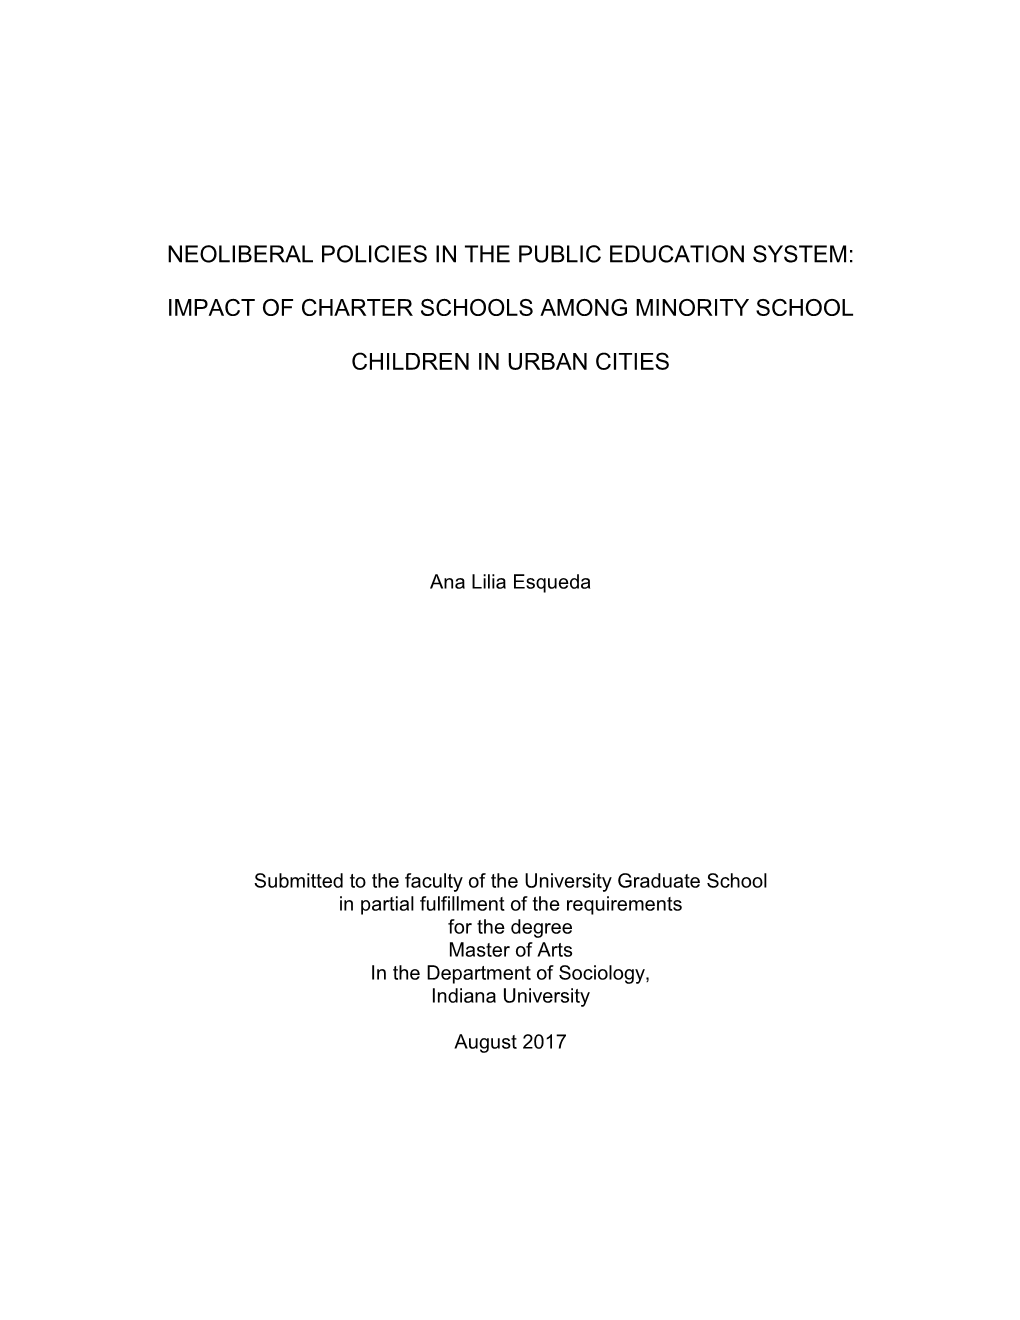 Neoliberal Policies in the Public Education System: Impact of Charter